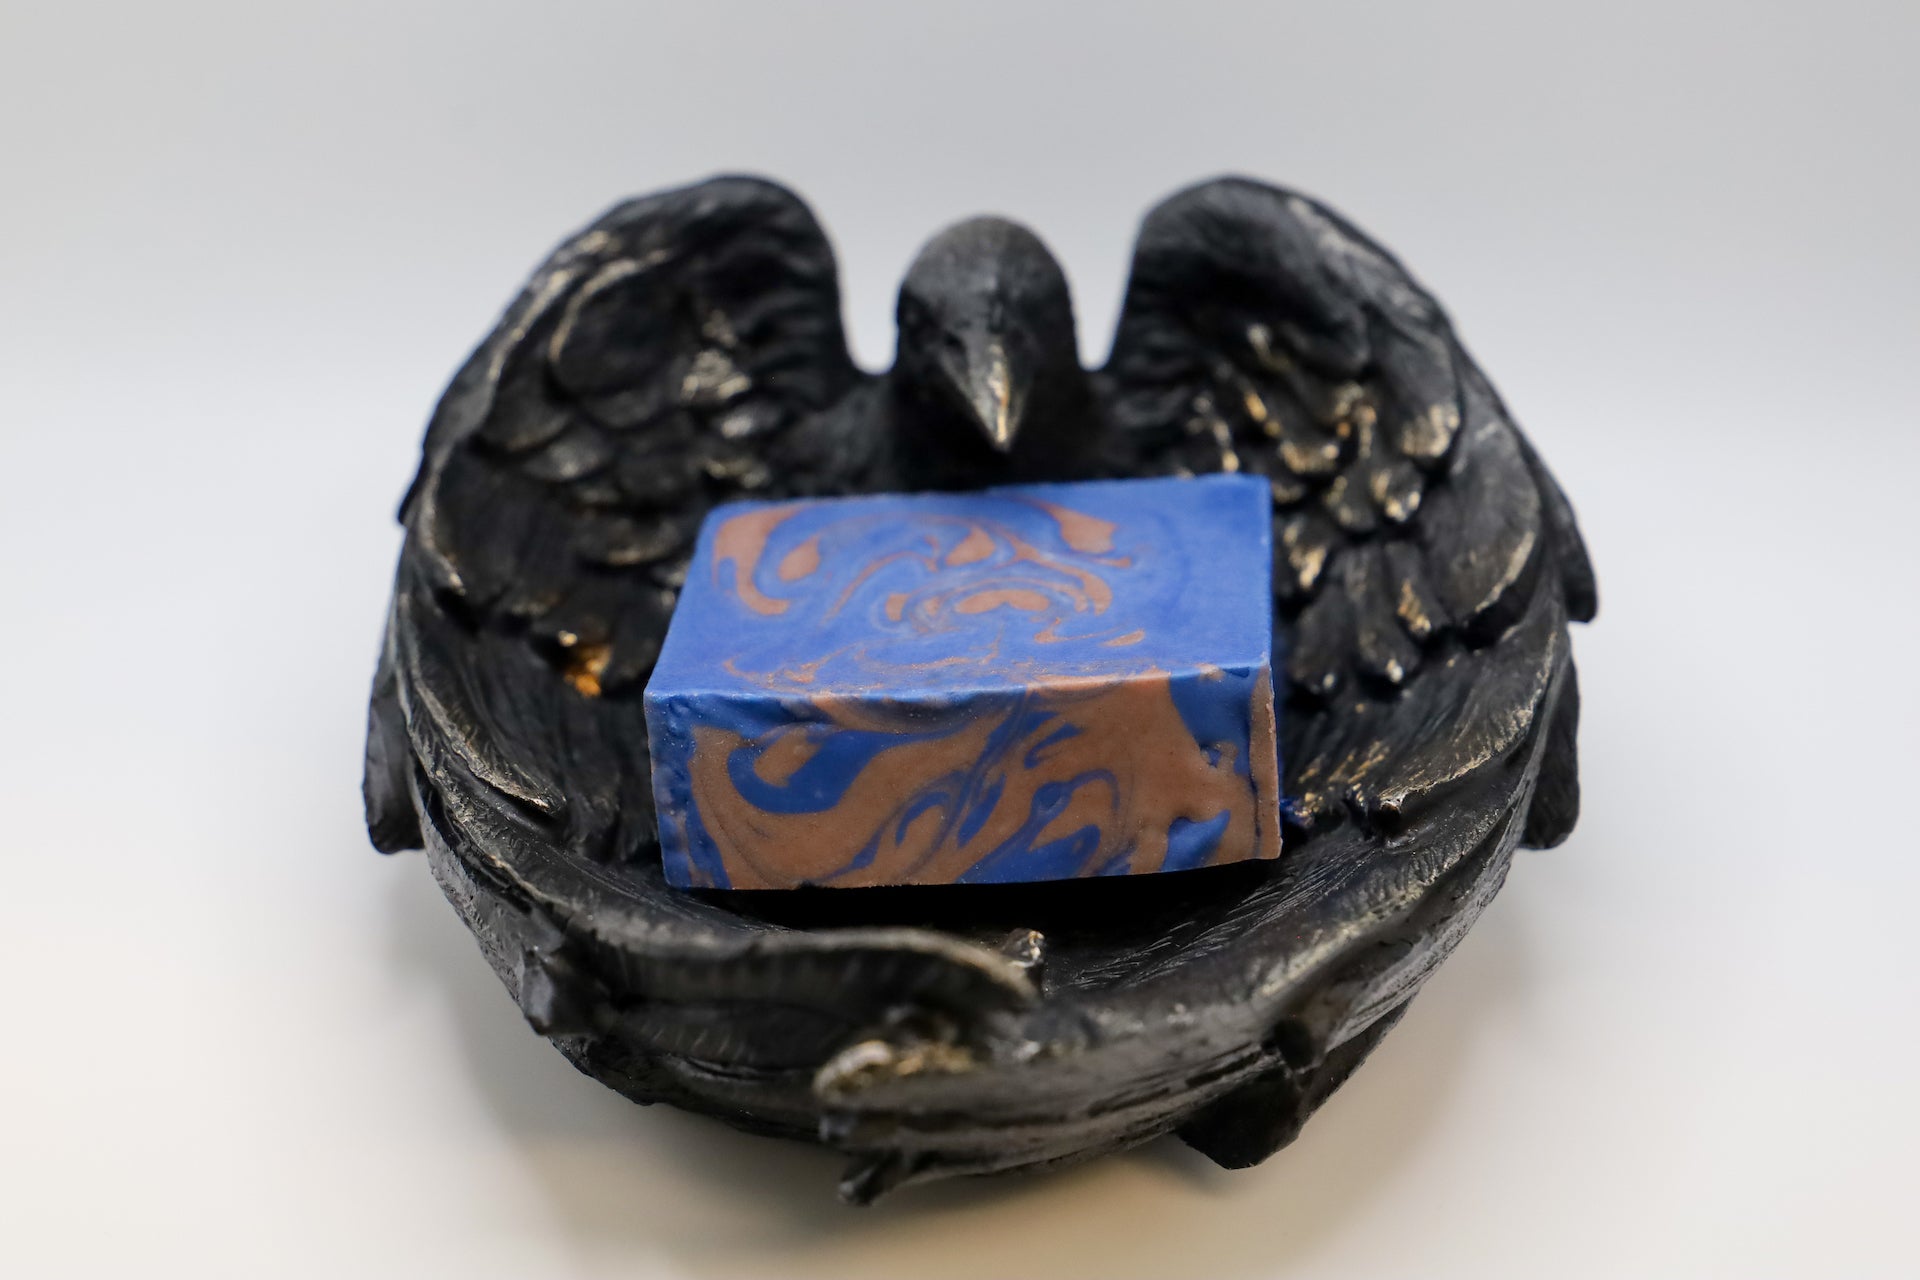 Deep blue colored soap with bronze swirls, complex scent blending woods and citrus.